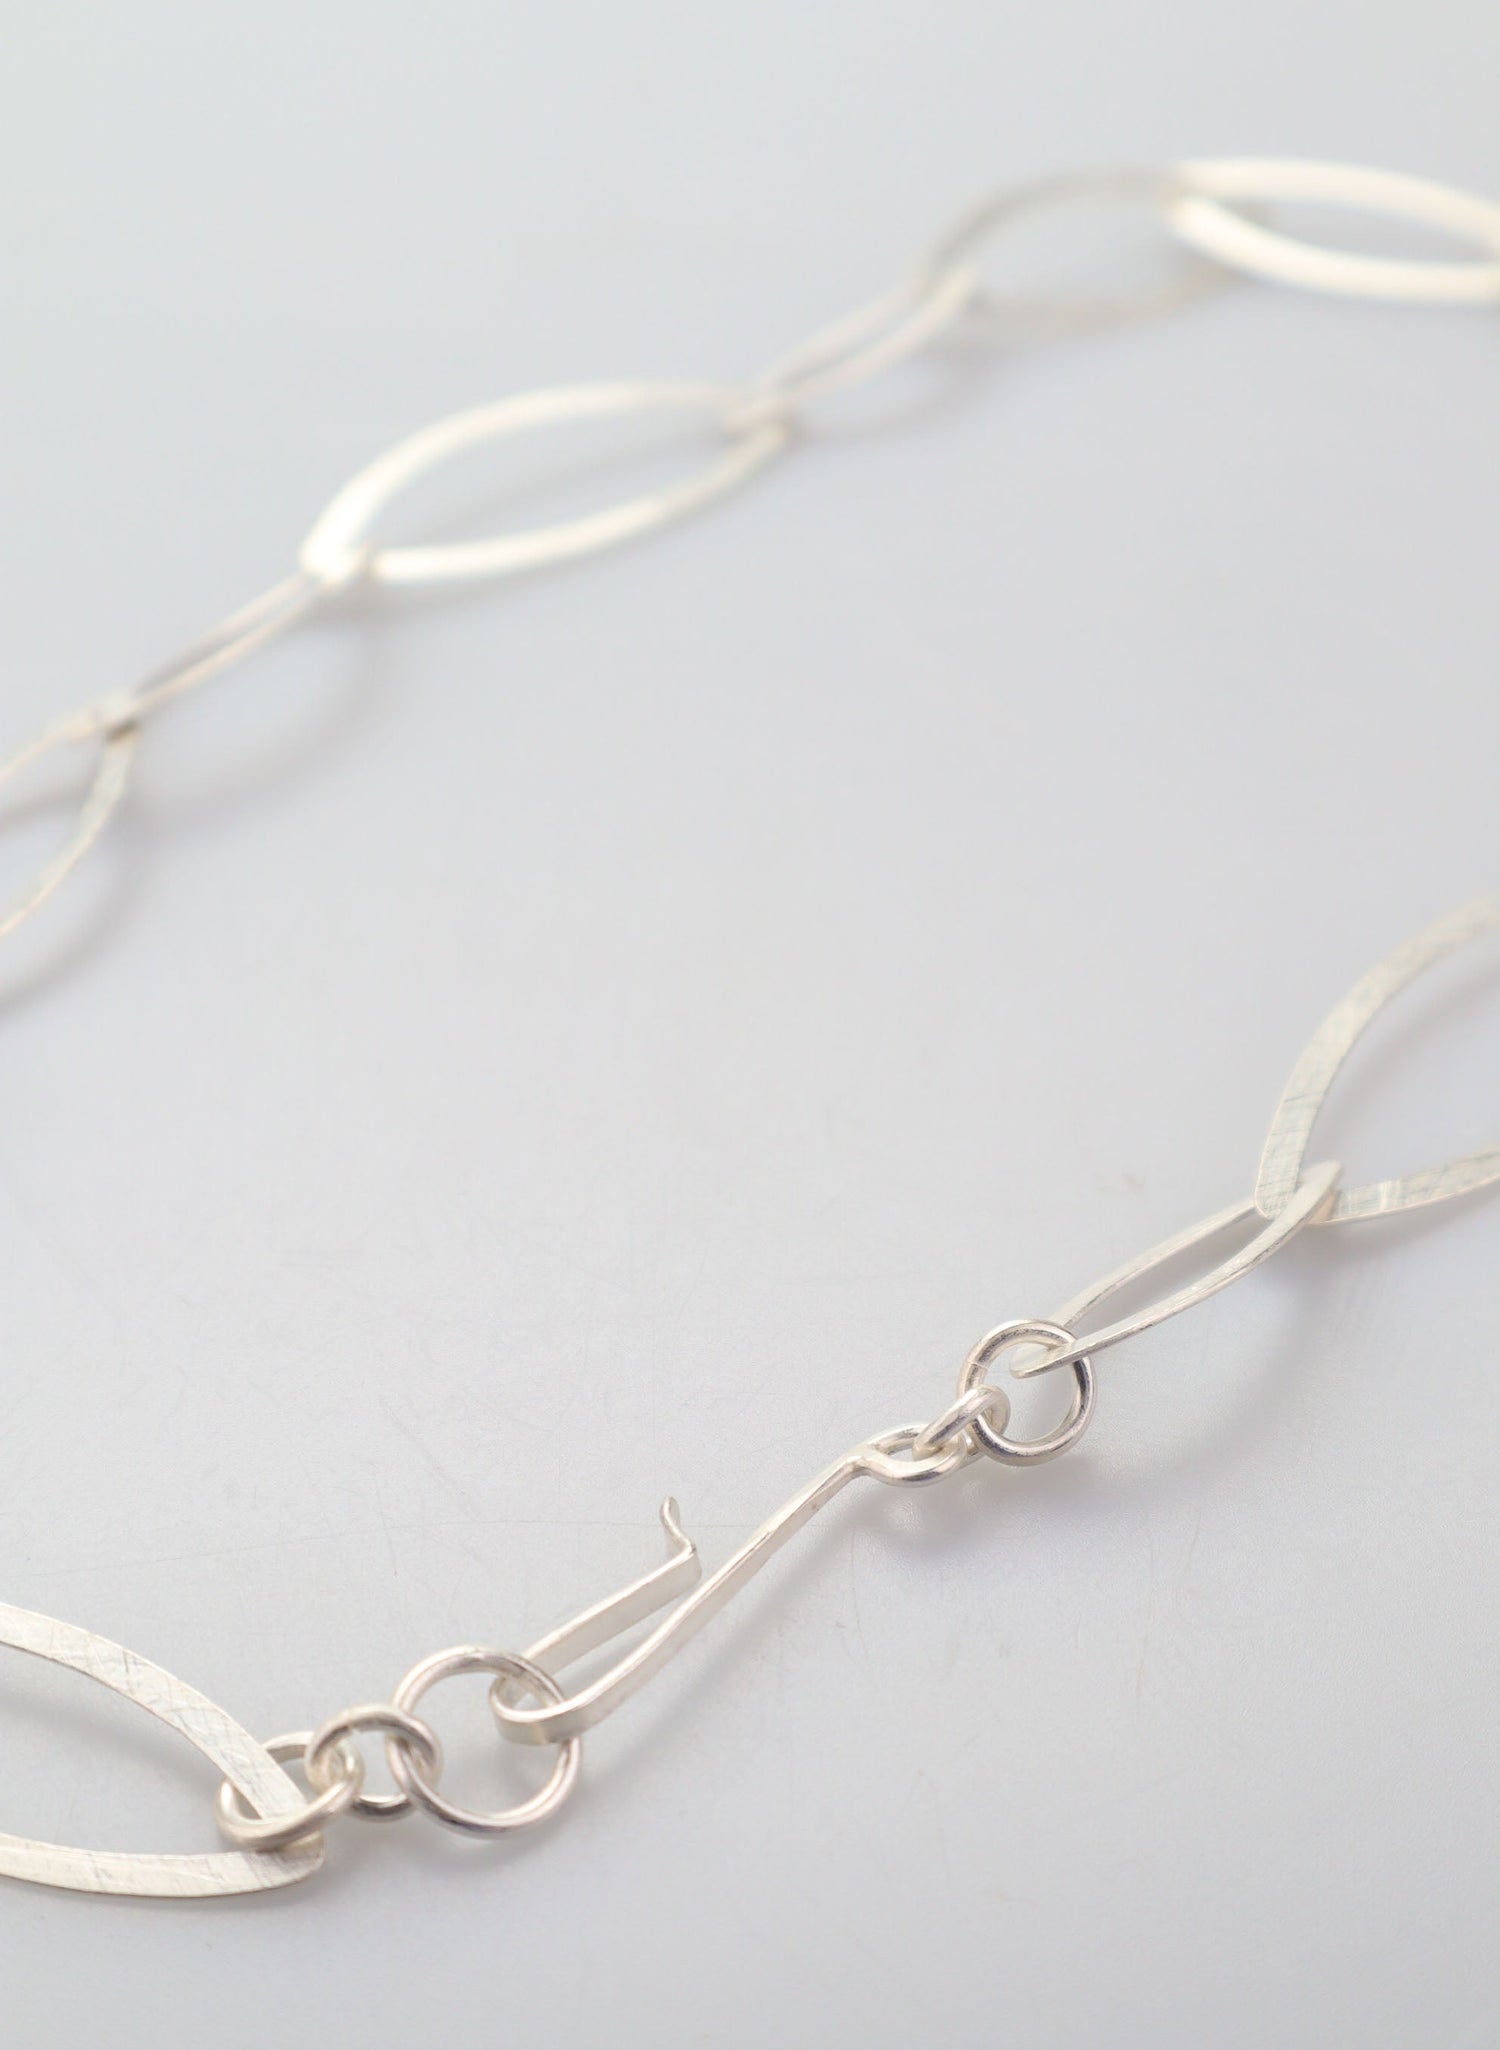 Pointed Long Link Necklace - Sterling Silver, Small